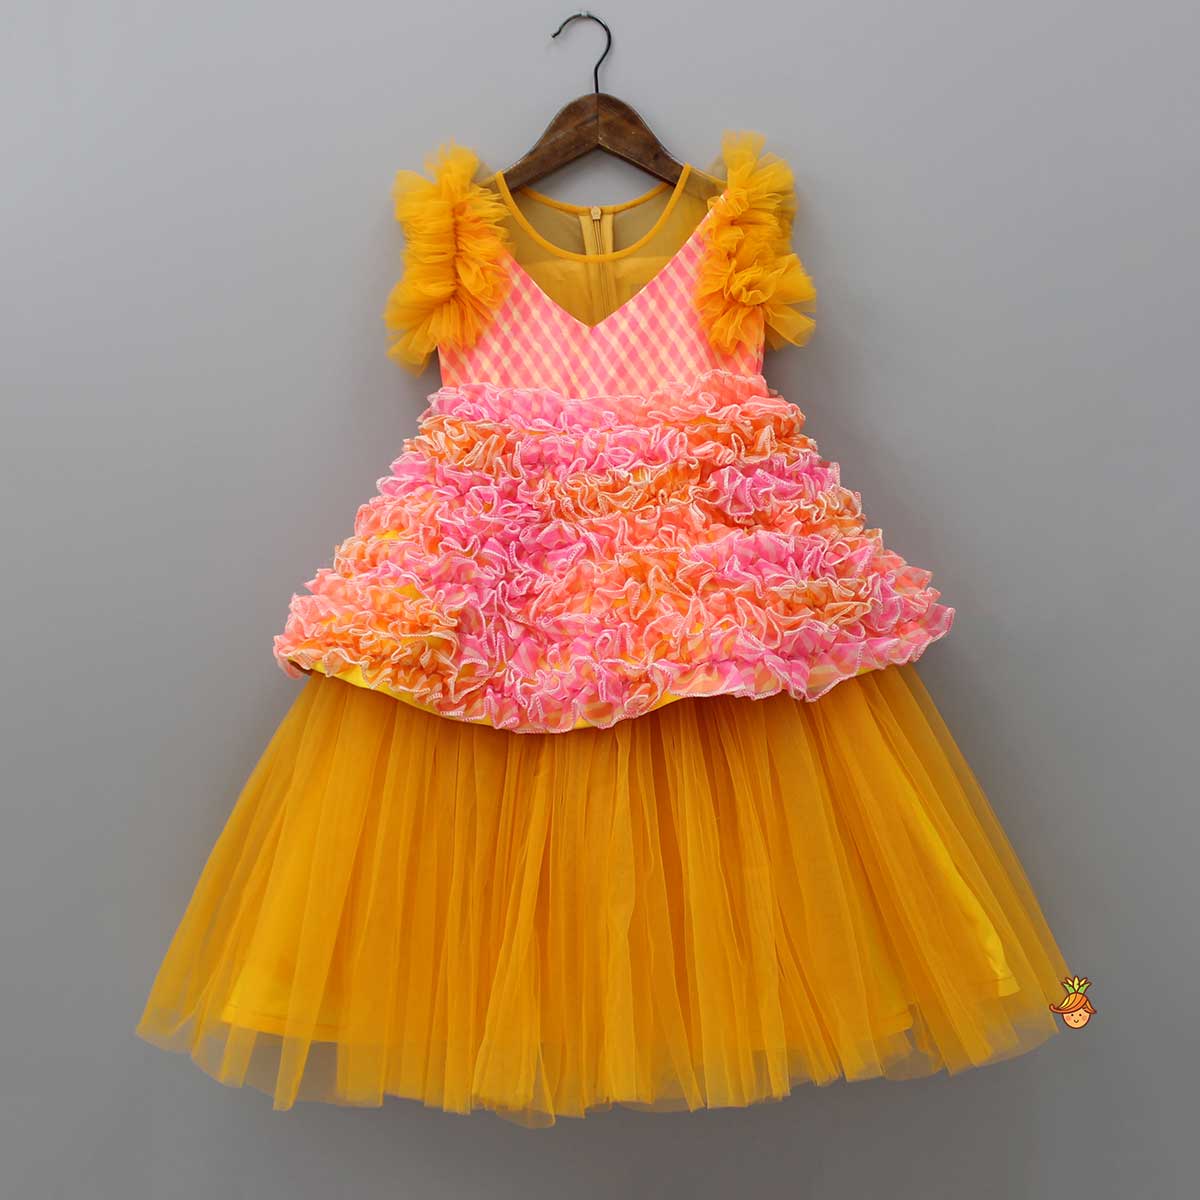 Multicolored Ruffle Net Dress With Matching Bow Clip